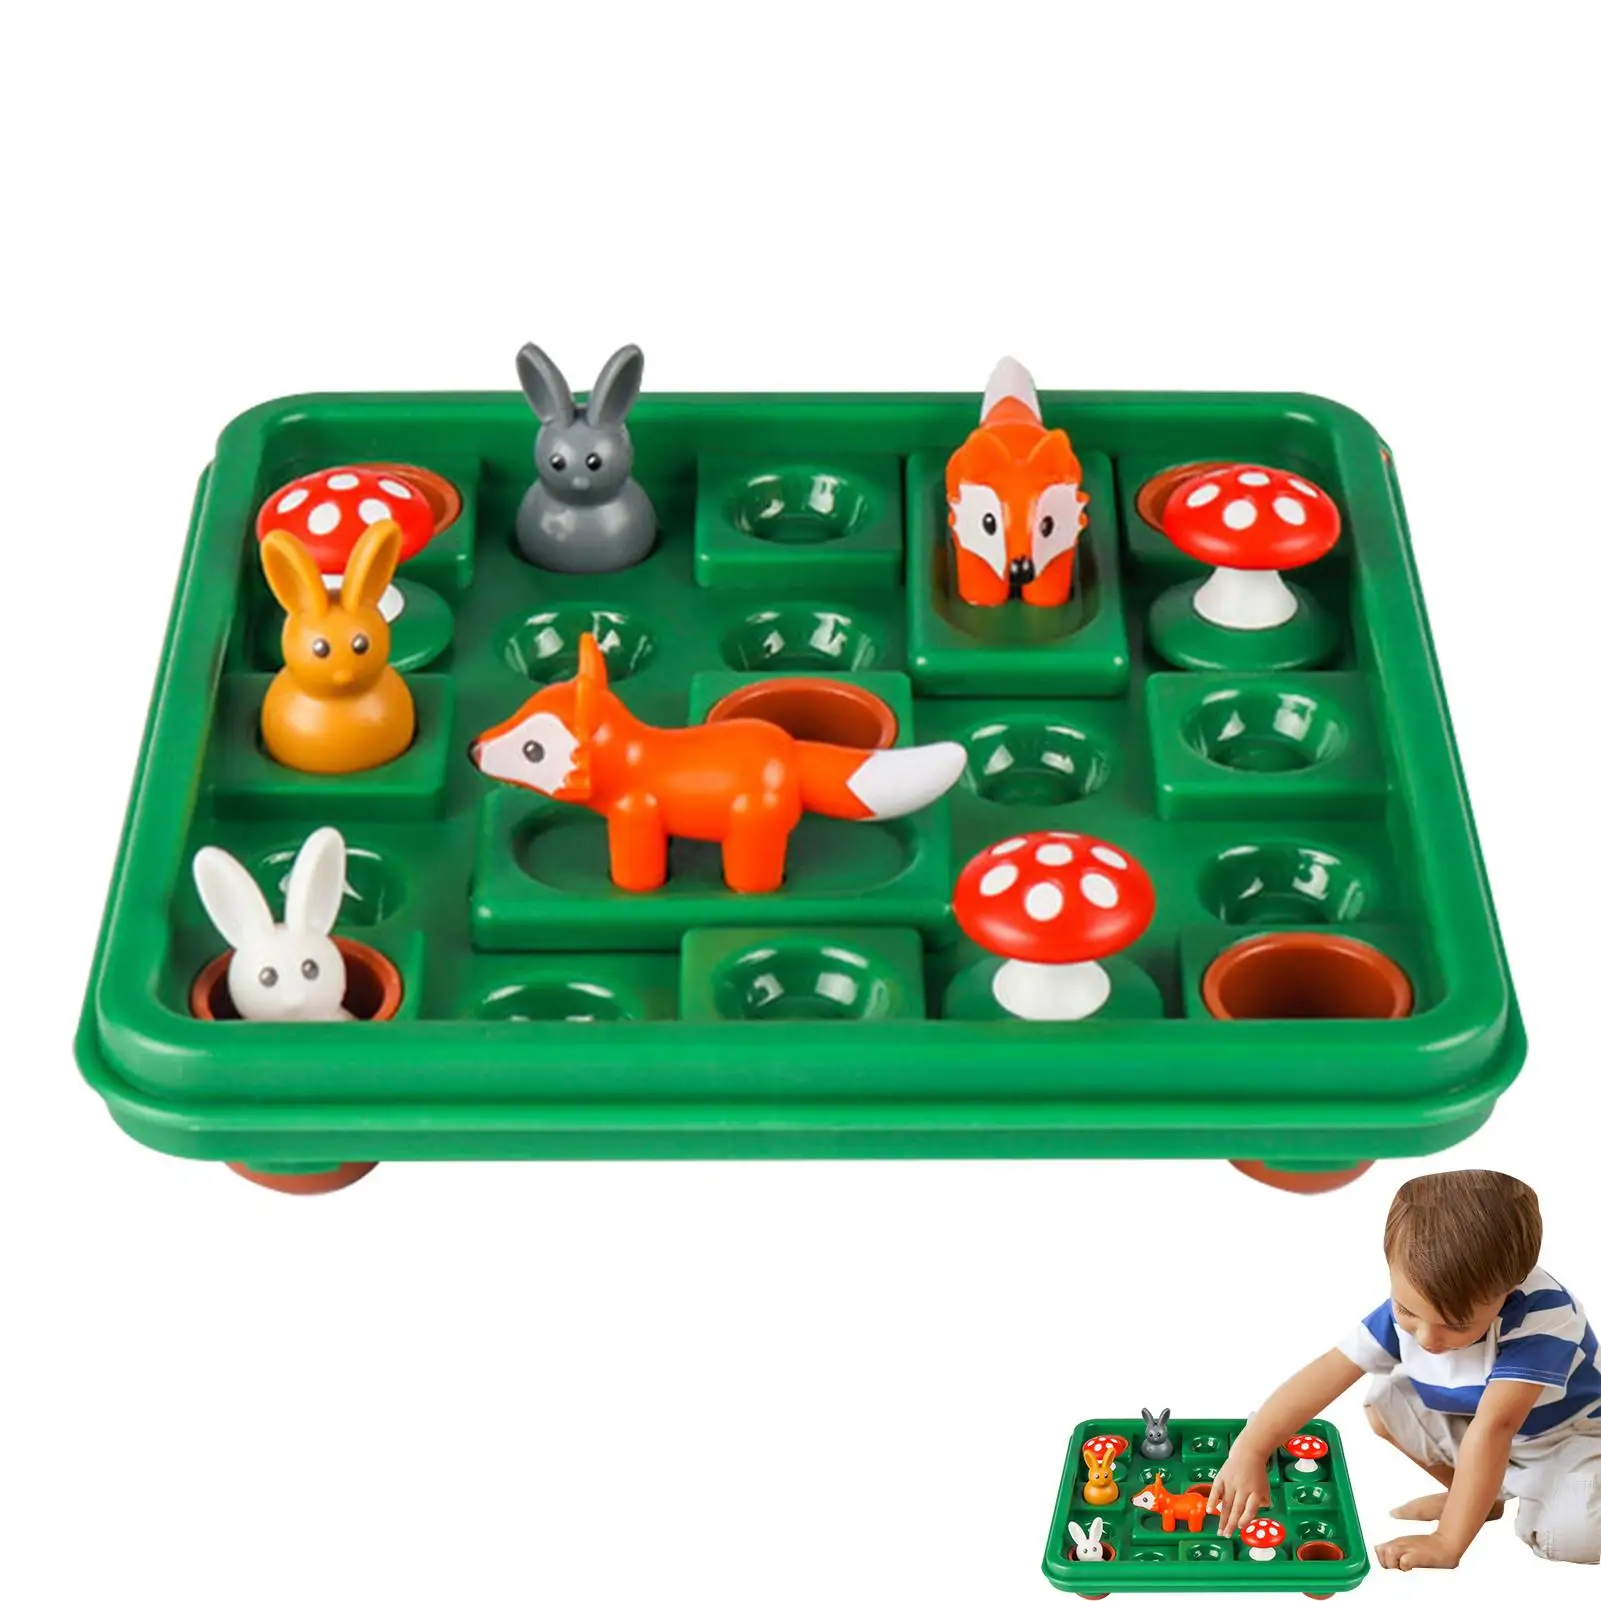 

Bunny Rabbit Competitive Trap Tablet Board Games Funny Rabbit Moving Strategy Tabletop Gift For Children Brain Development